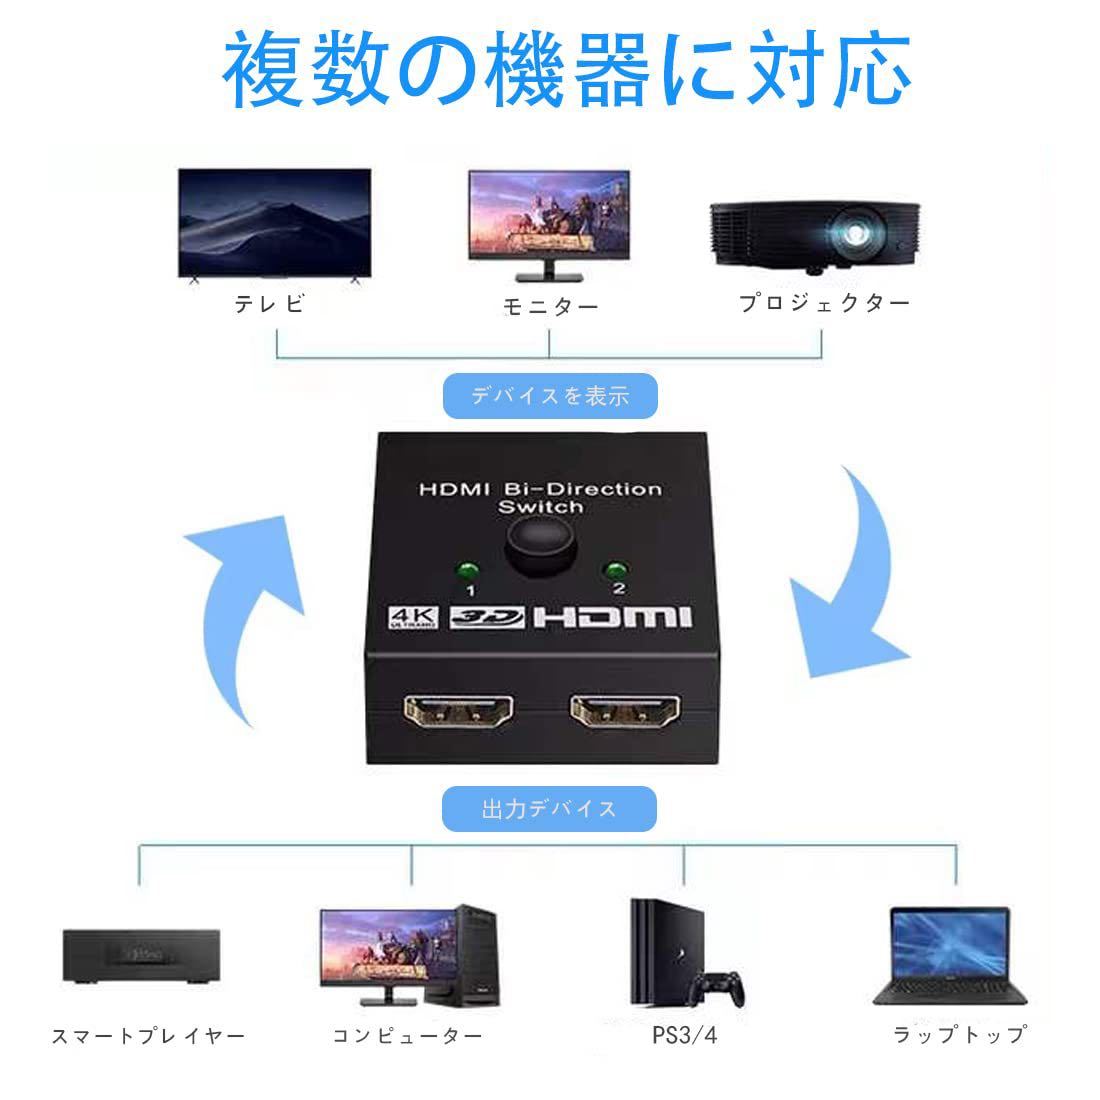 HDMI switch hdmi selector distributor adapter switch .-hdmi hub splitter two . interactive 4k